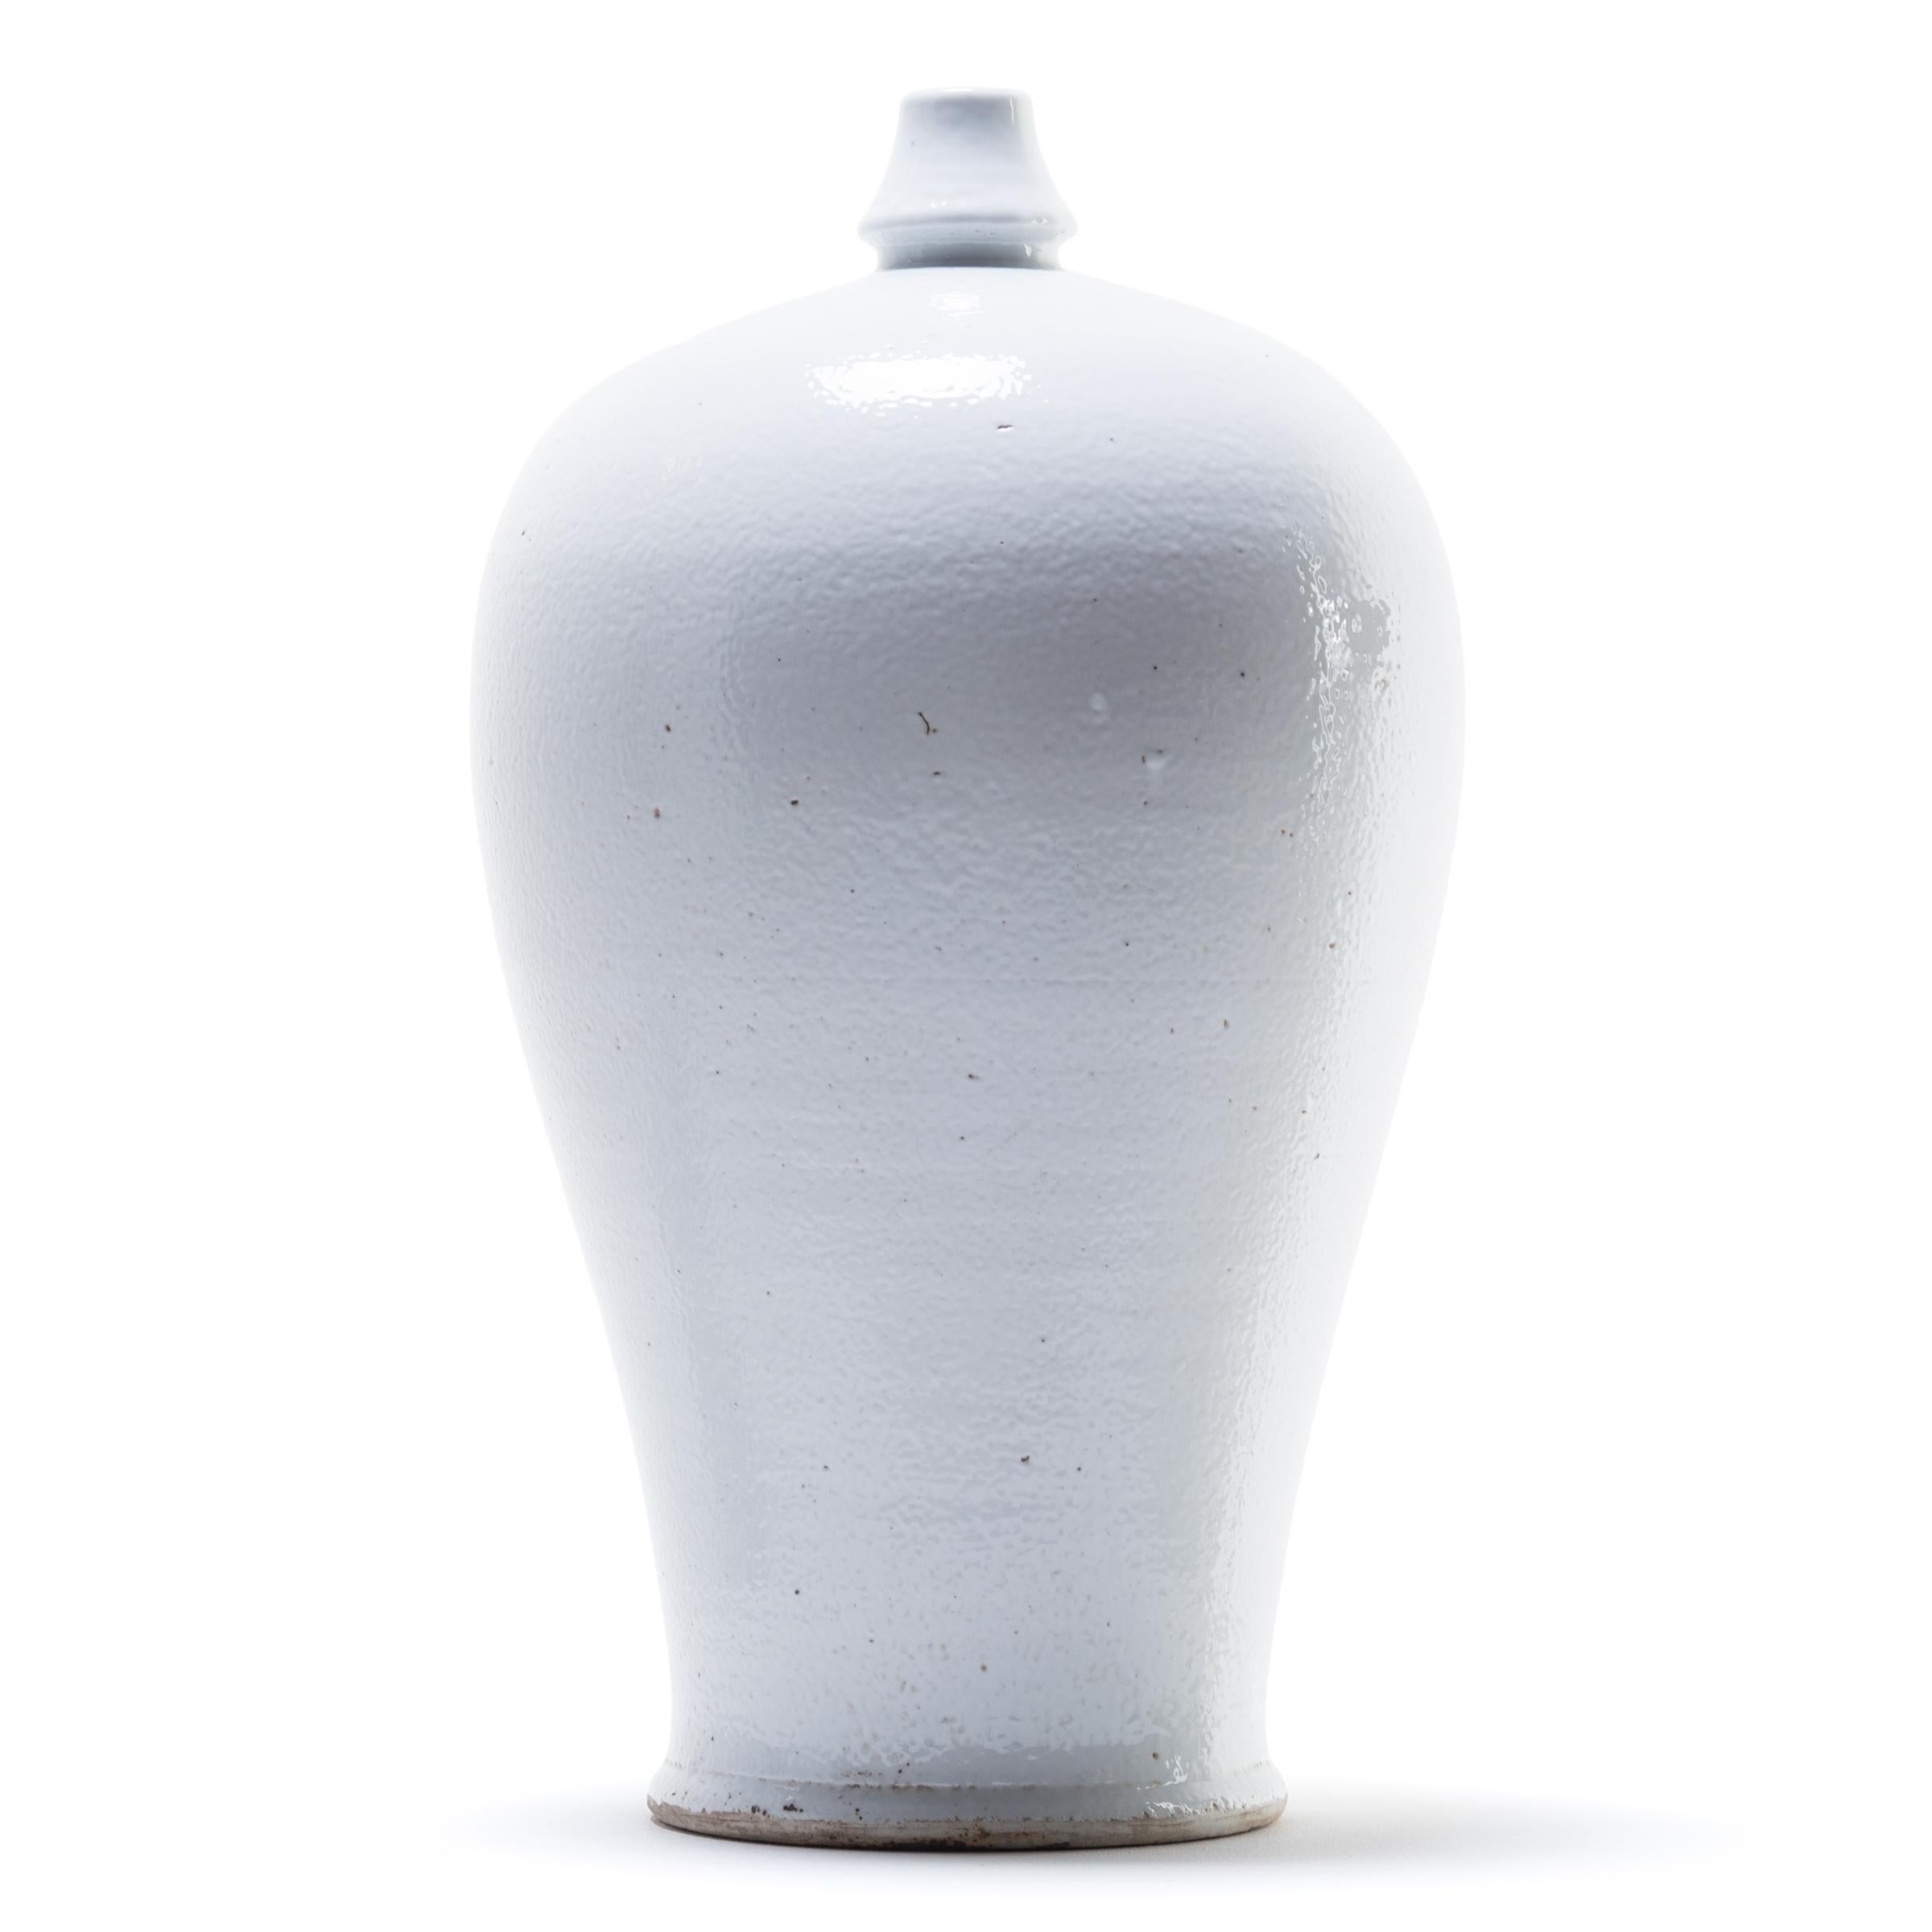 Meiping vases were traditionally used to hold the branches of plum trees, celebrated in China as symbols of strength. Made in China's Jiangxi province, this contemporary interpretation streamlines the form, cloaking it in a milky white glaze to call